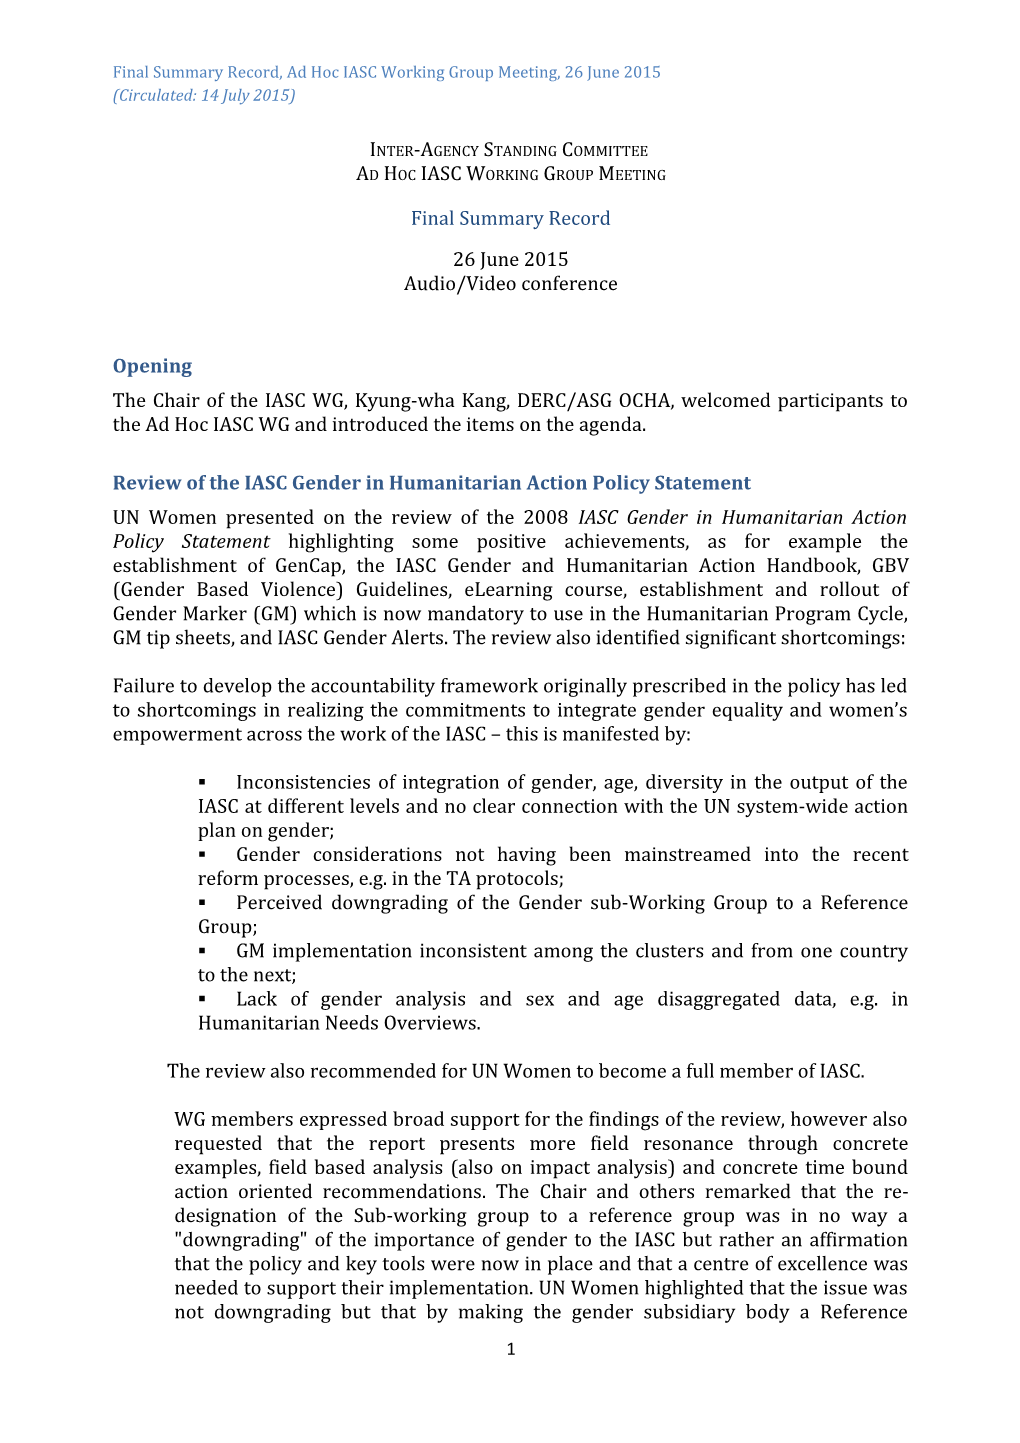 Final Summary Record, Ad Hoc IASC Working Group Meeting, 26 June 2015